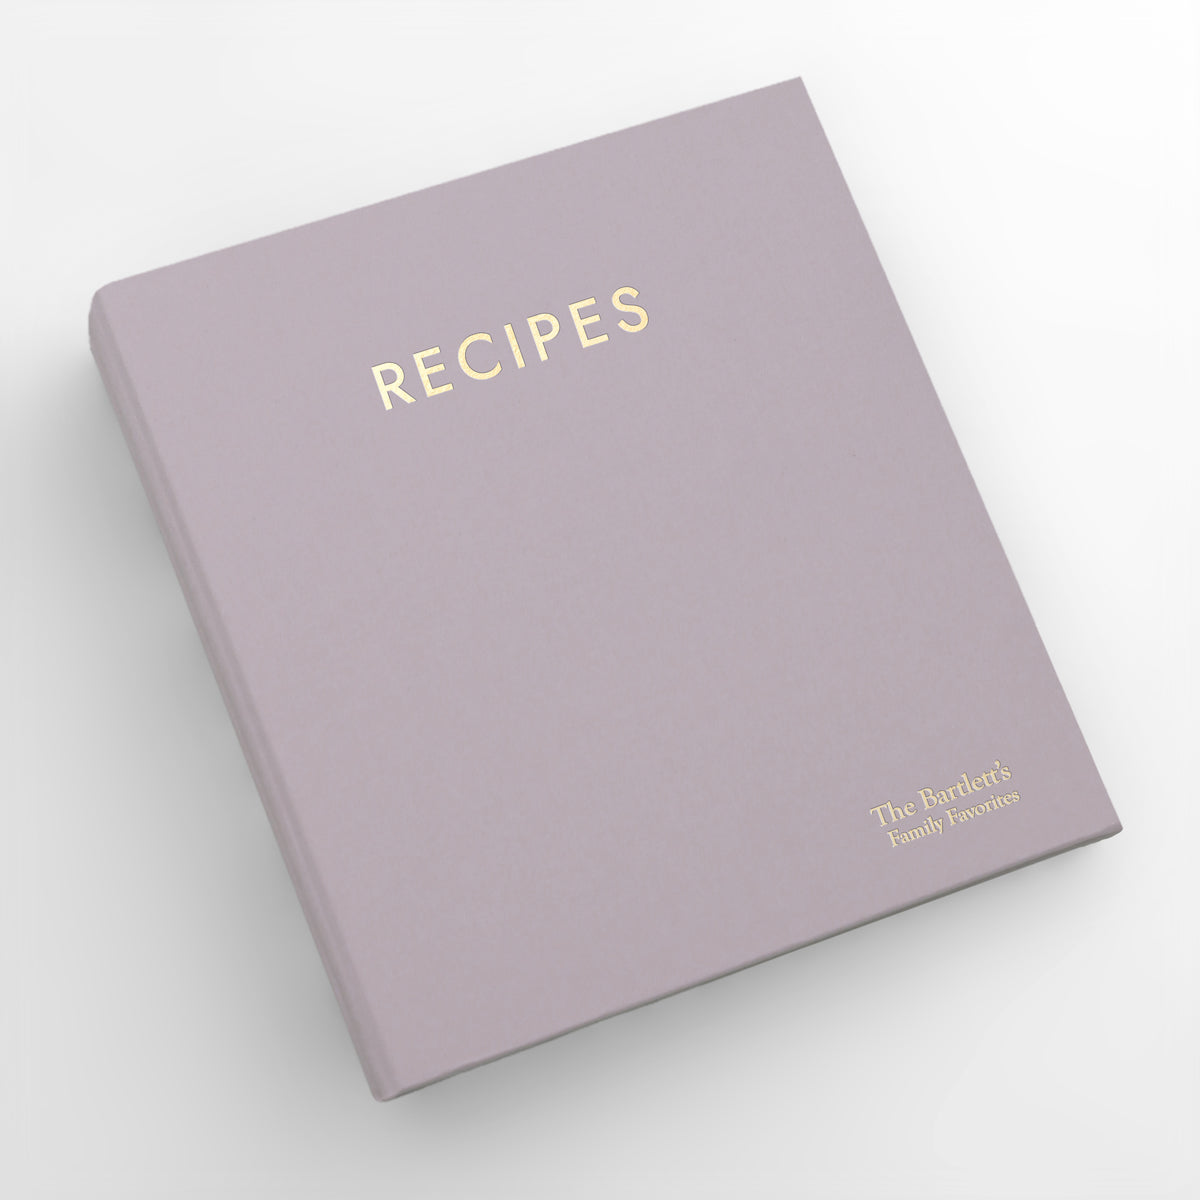 Recipe Journal Embossed with &quot;RECIPES&quot; covered with Lavender Cotton